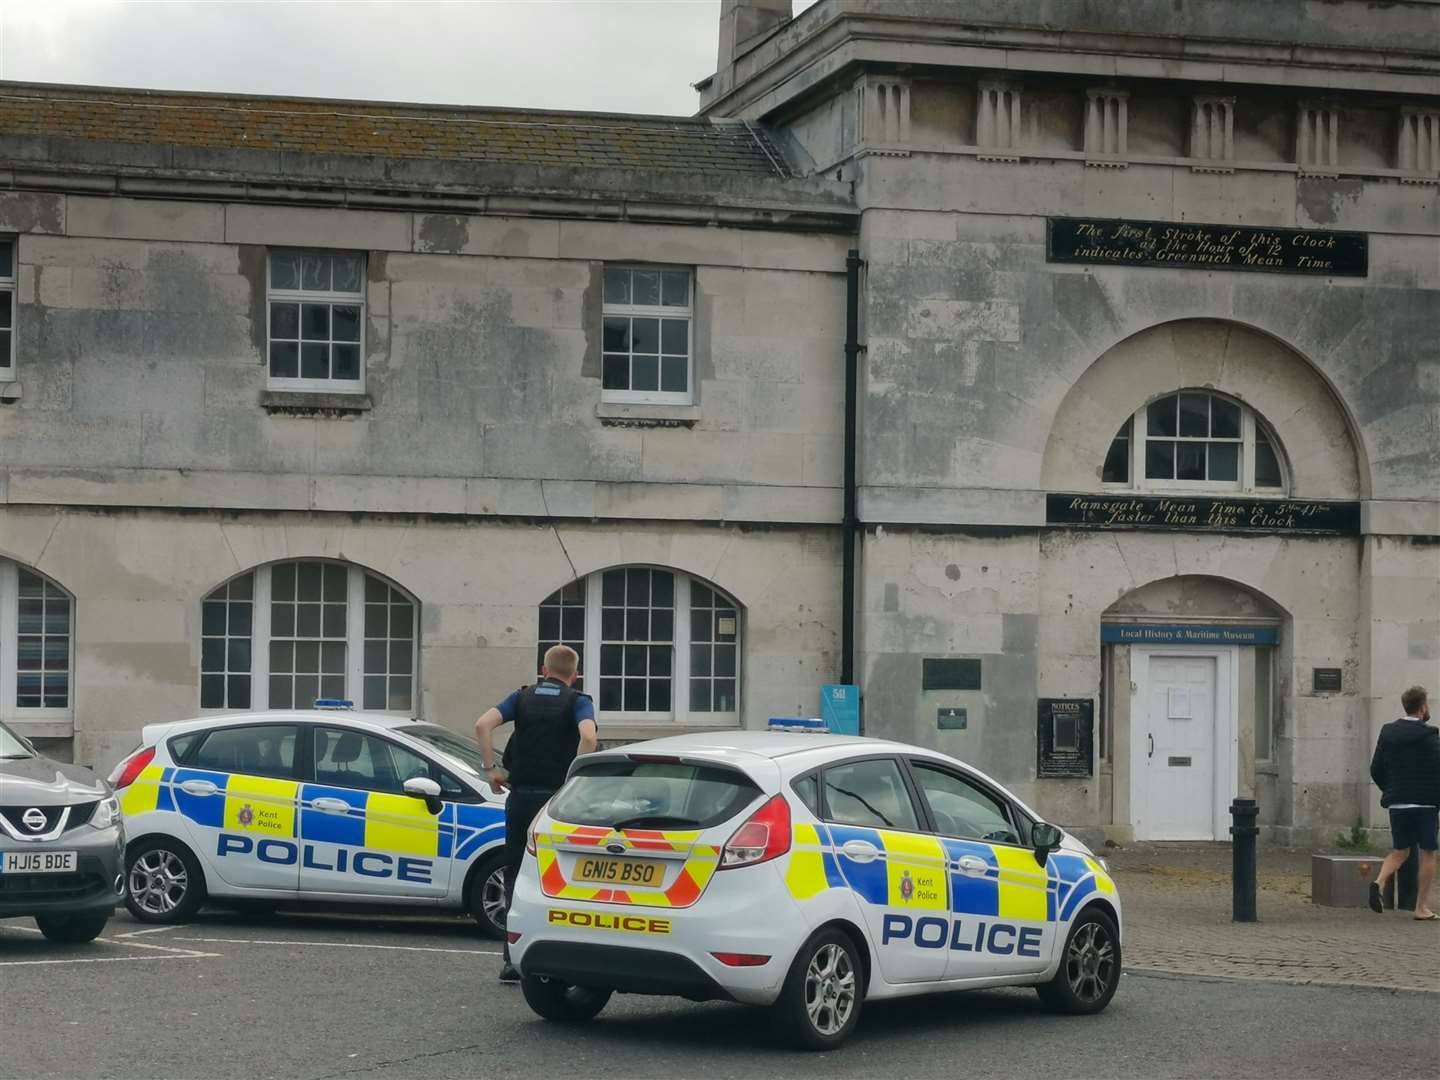 Police are currently at the scene in Harbour Parade, Ramsgate